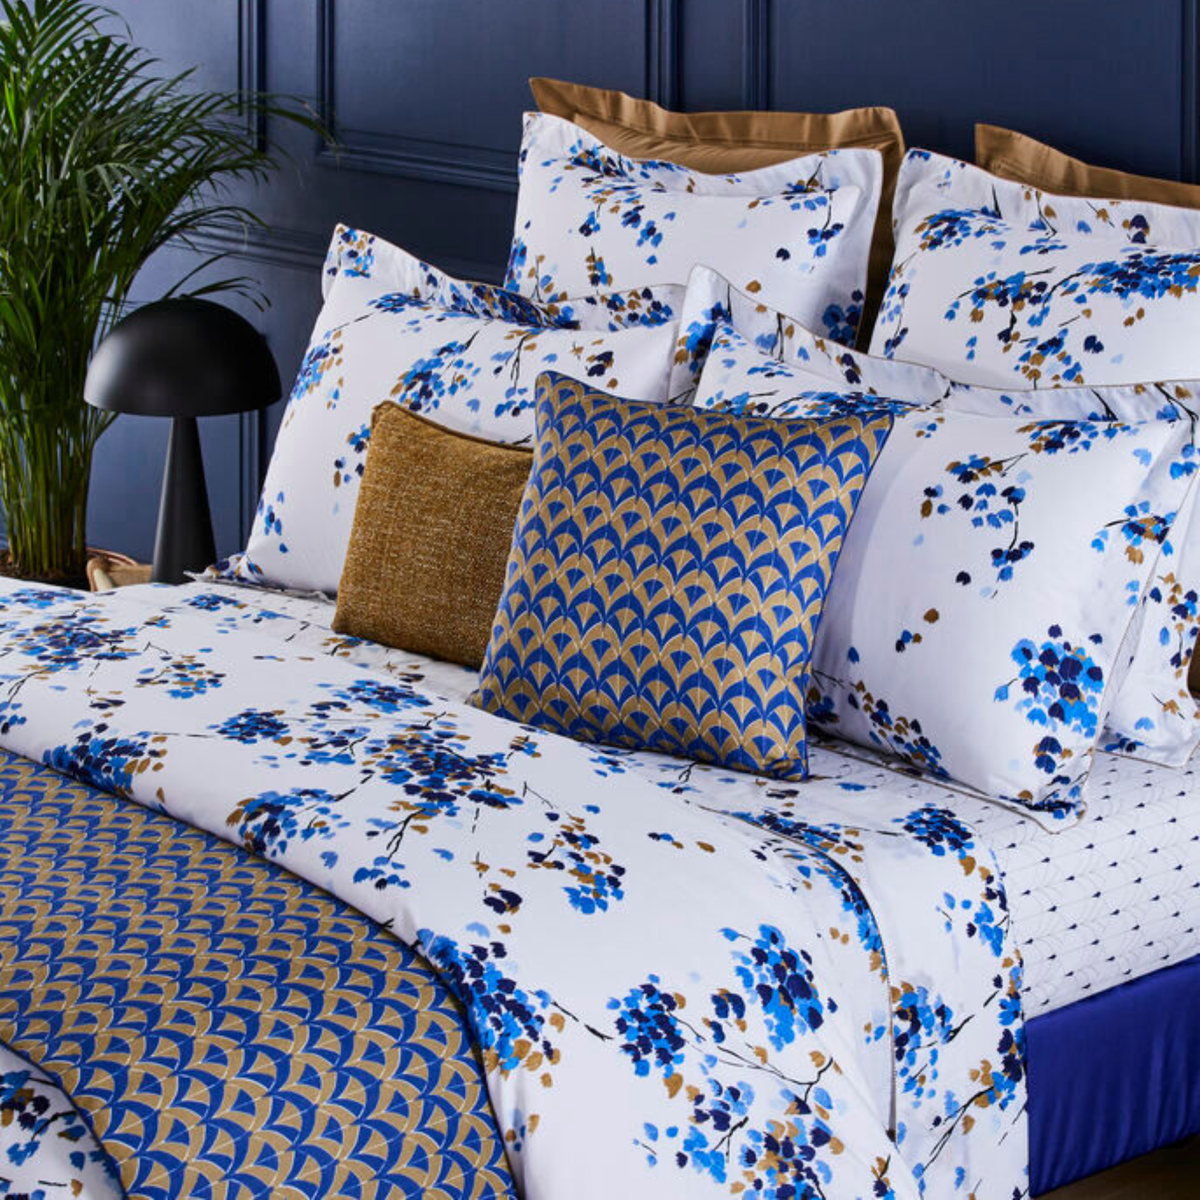 Closeup of Full Bed Dressed in Yves Delorme Canopée Bedding